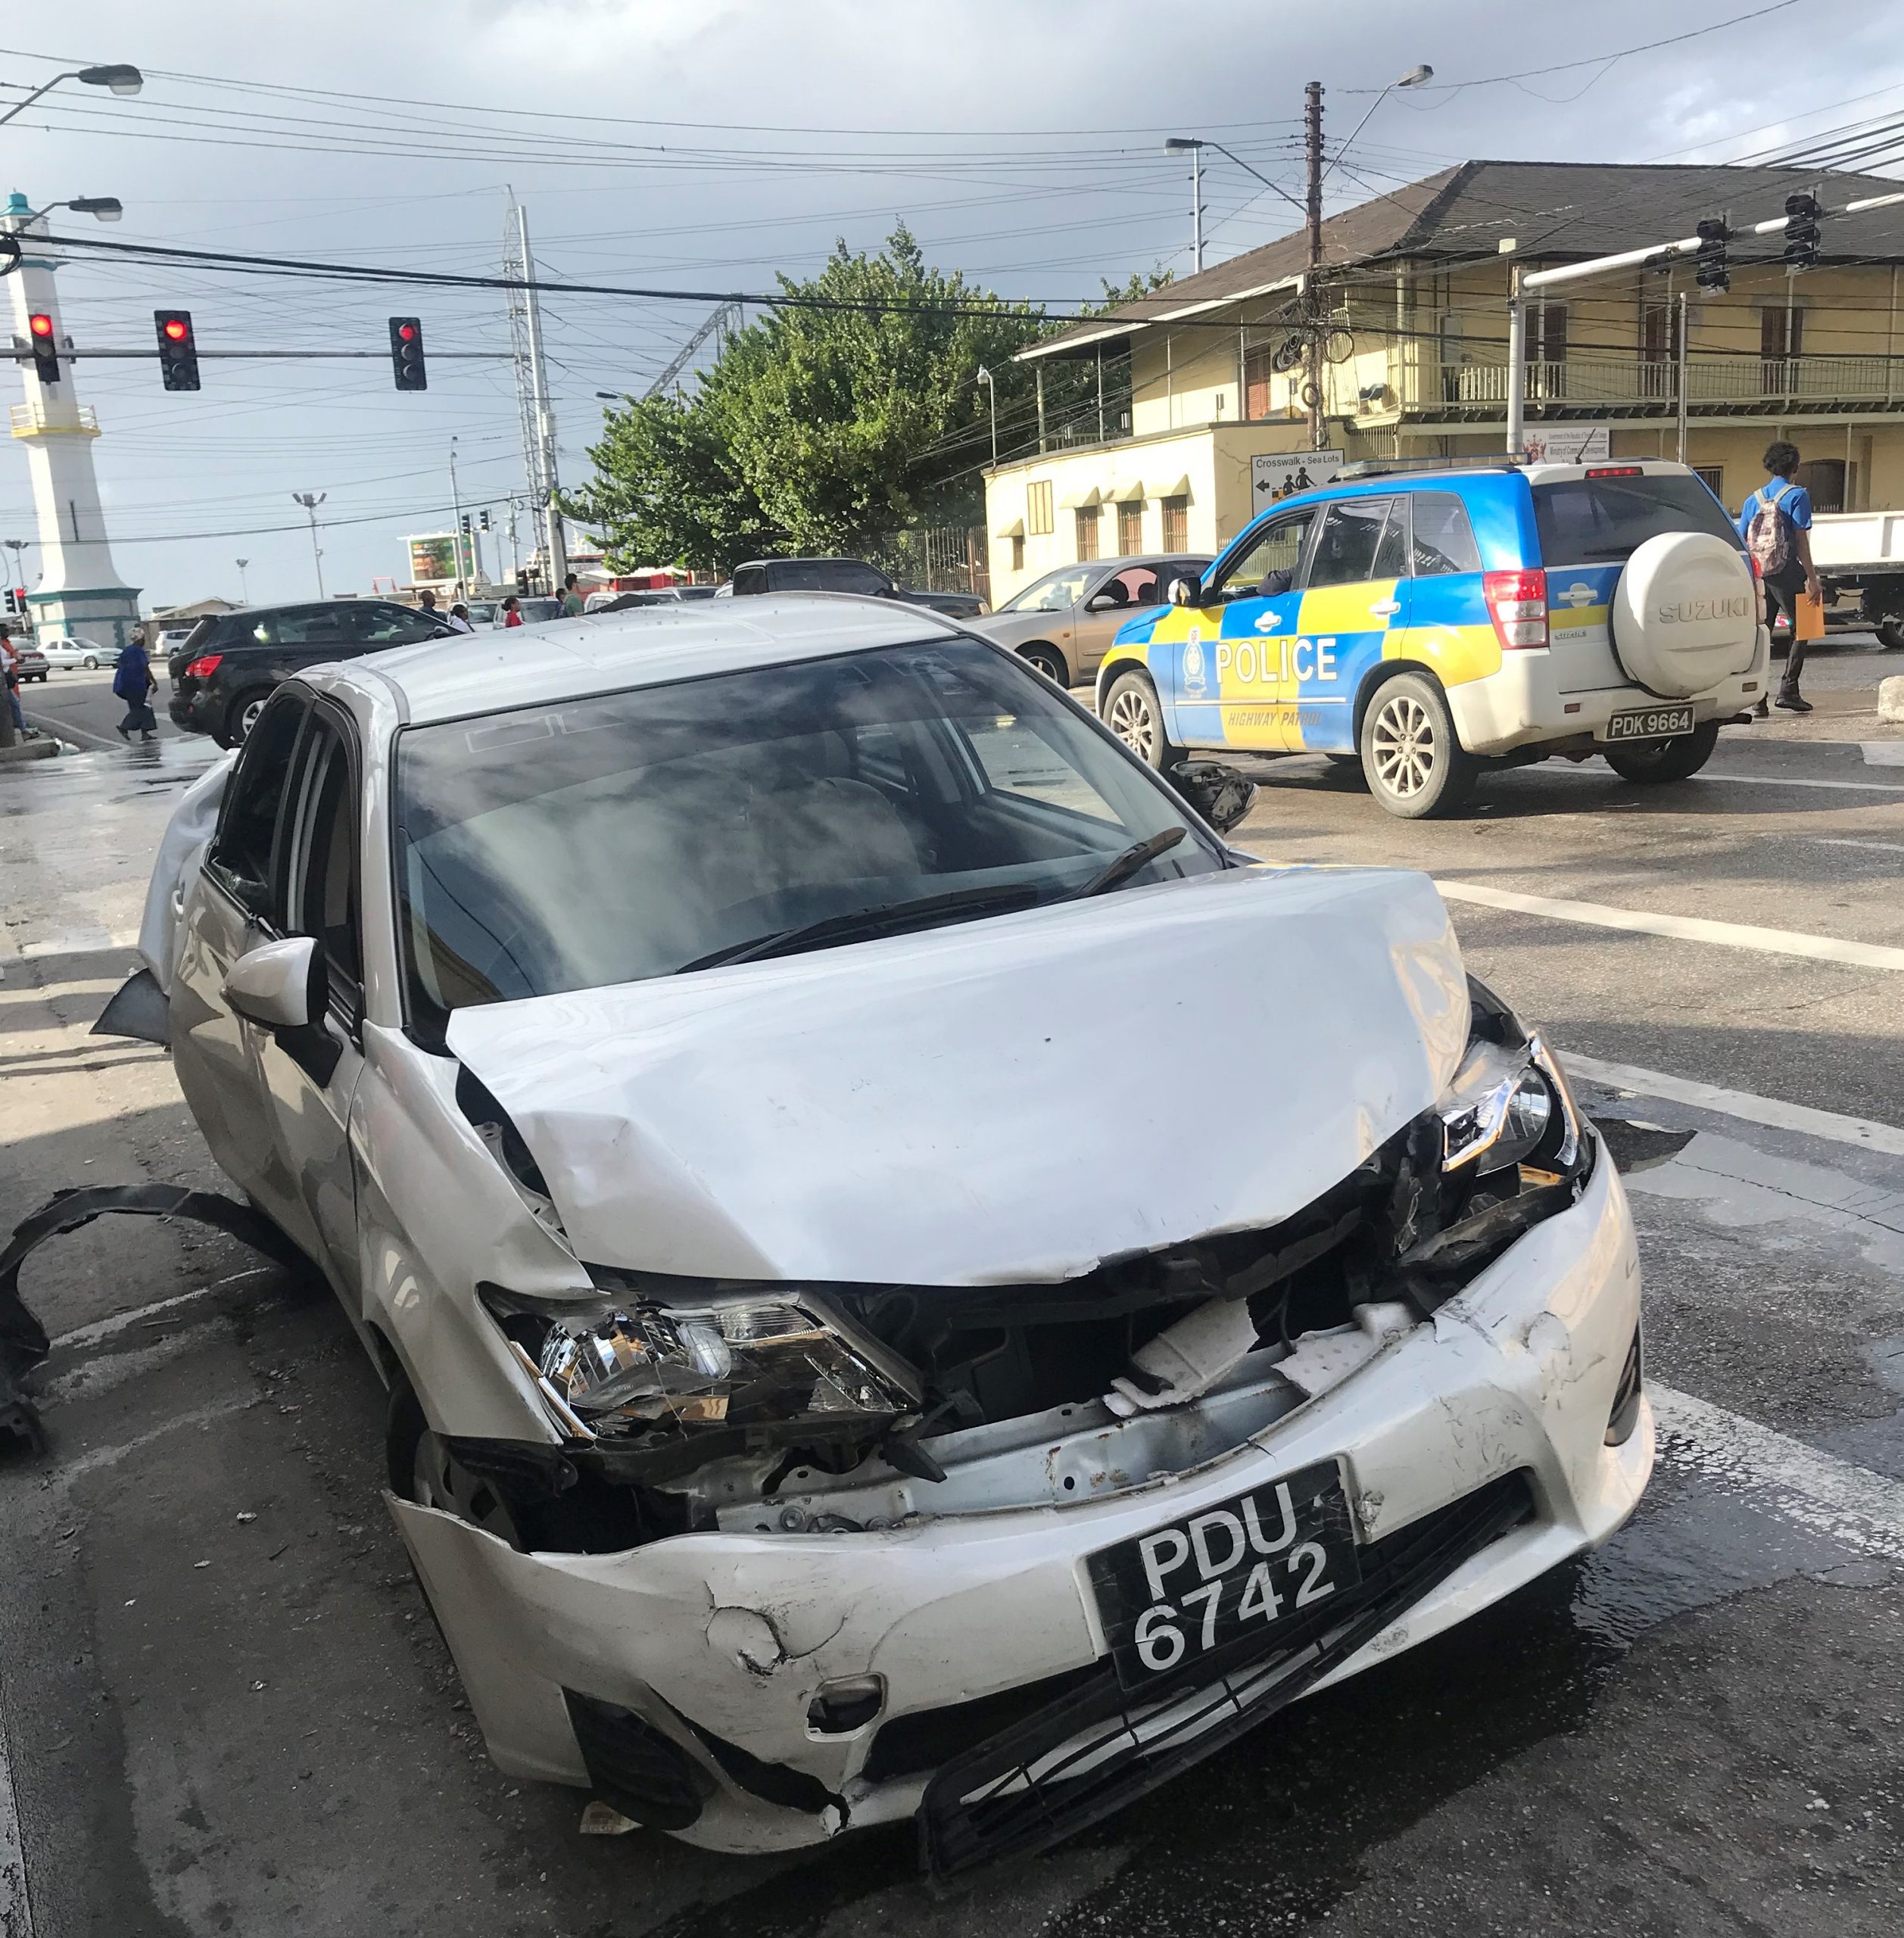 Accident in POS, driver suffered seizure at the wheel